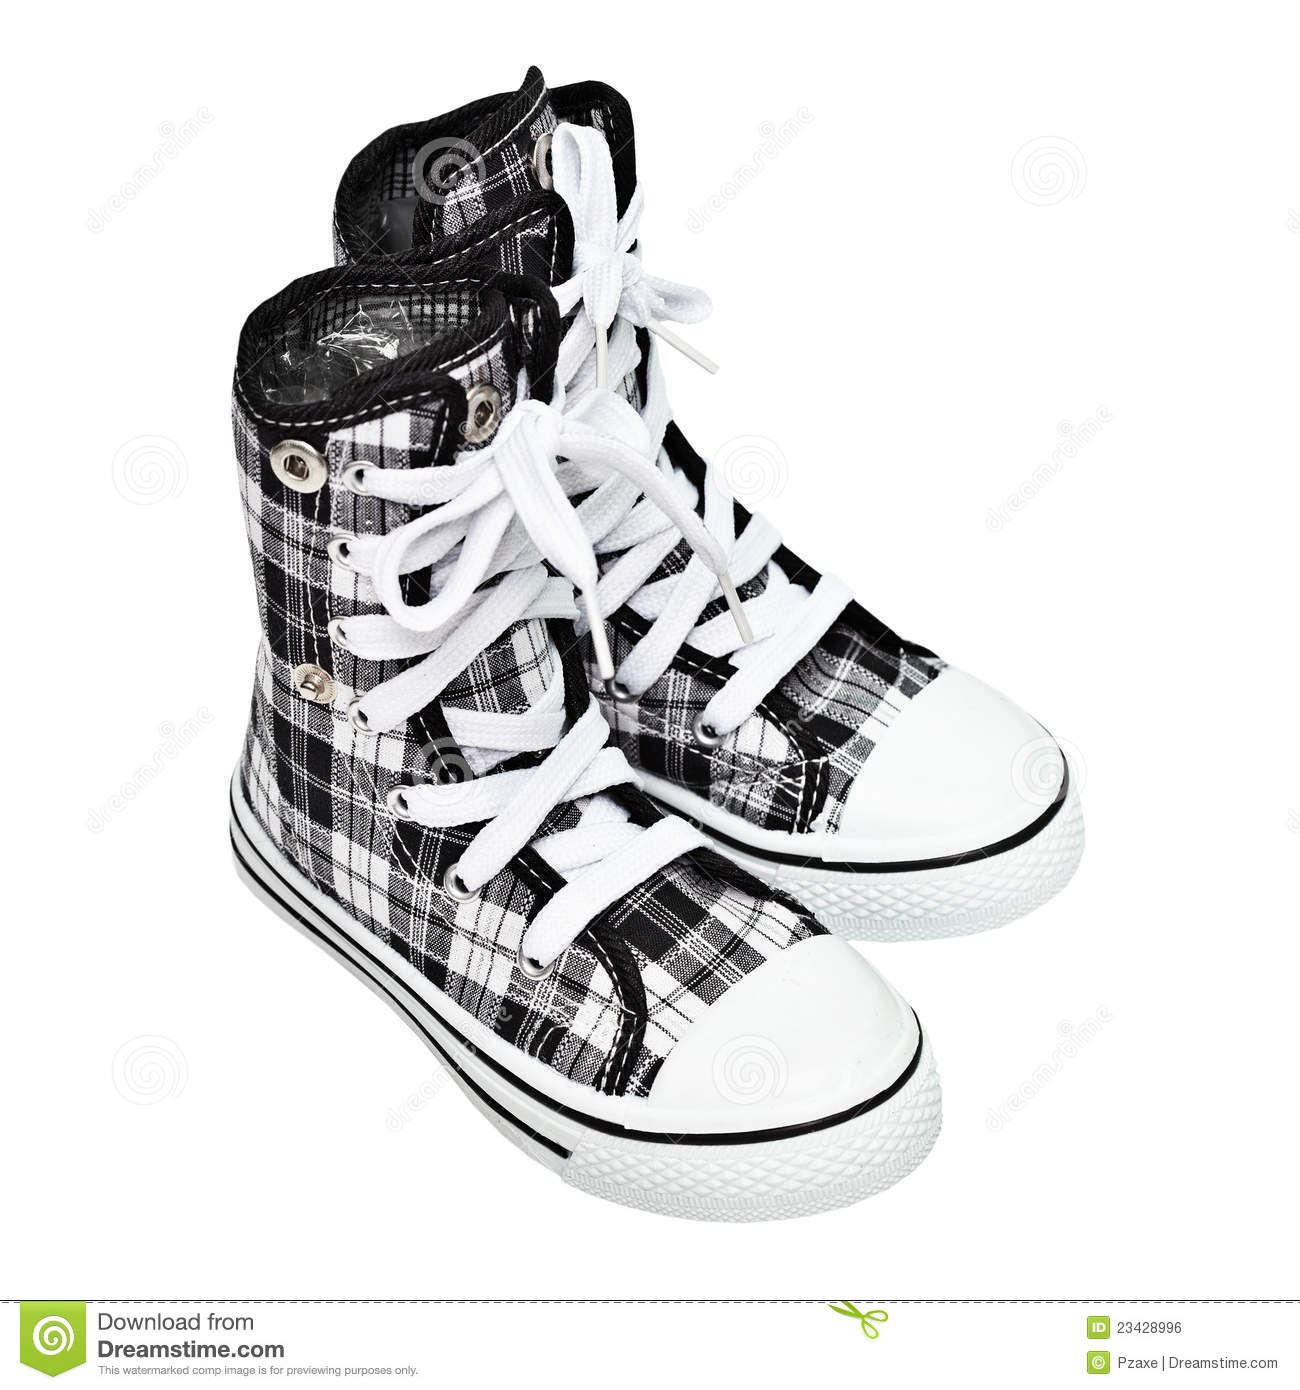 Sports Shoes   High Top Sneakers Royalty Free Stock Image   Image